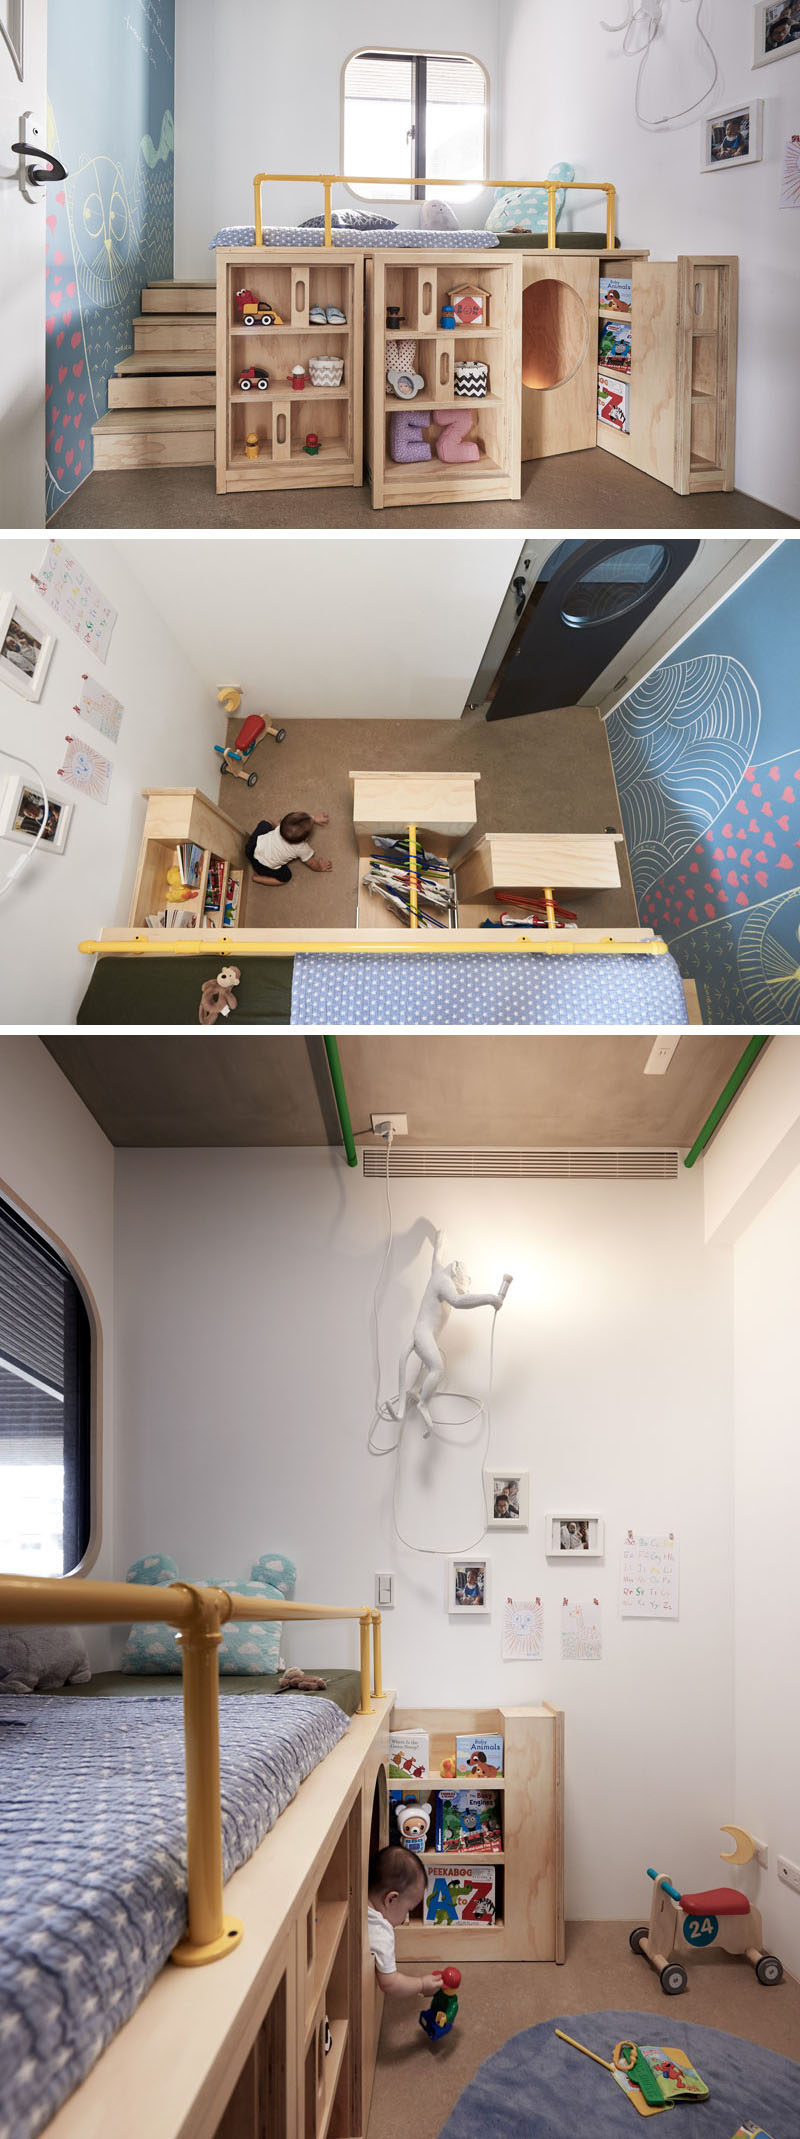 HAO Design have created a child's bedroom with a custom bed that's been designed to get the child familiary with putting things away after using them. #KidsBed #BedDesign #Bedroom